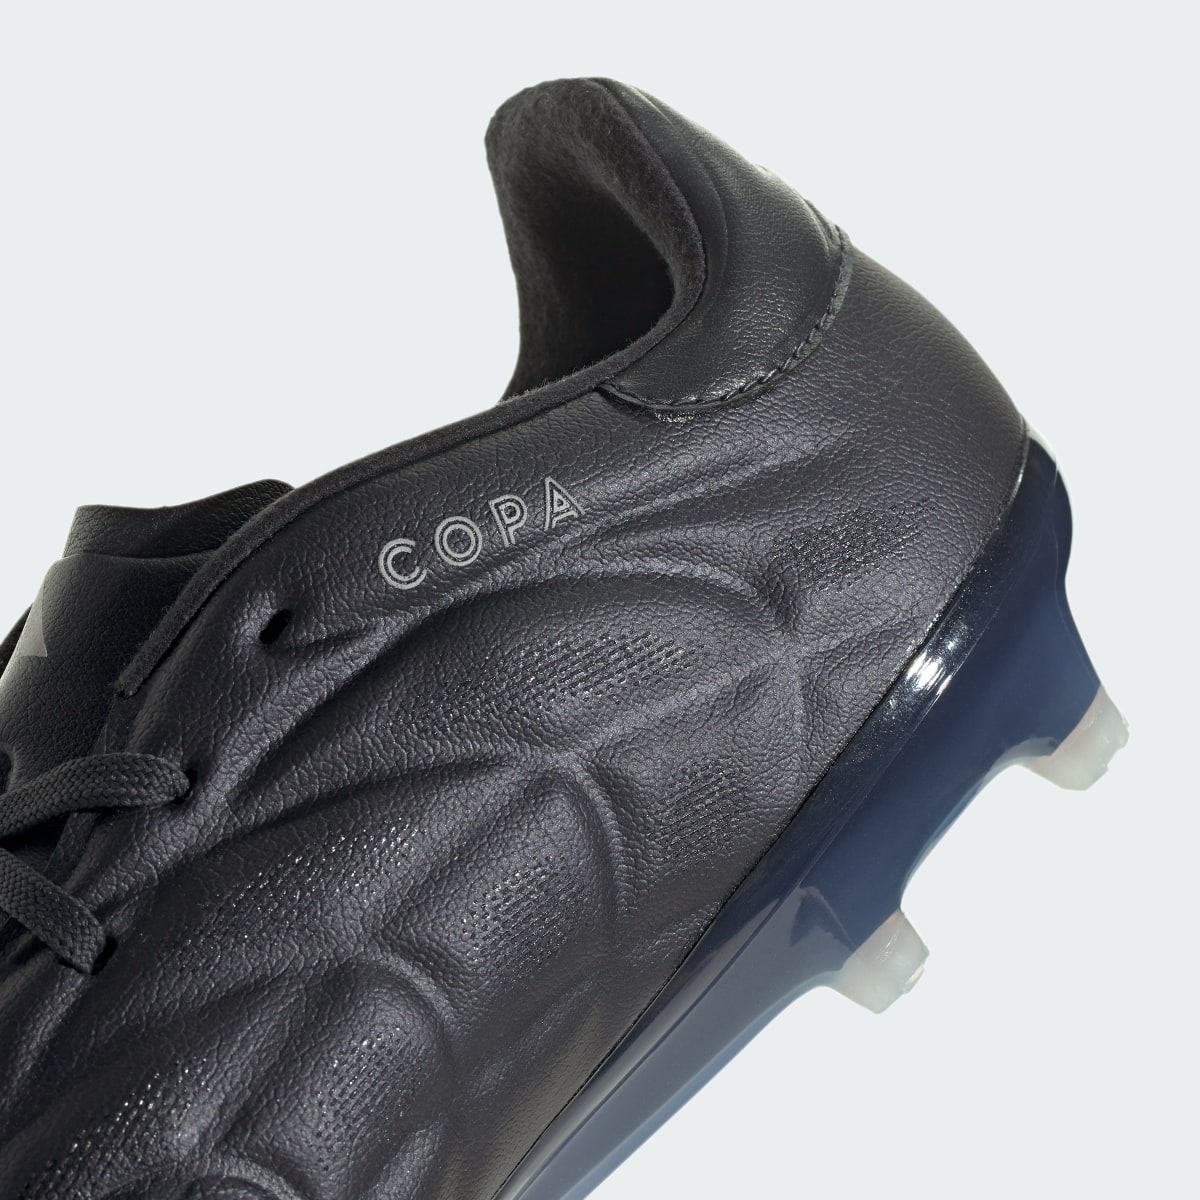 Adidas Copa Pure II Elite Firm Ground Boots. 9